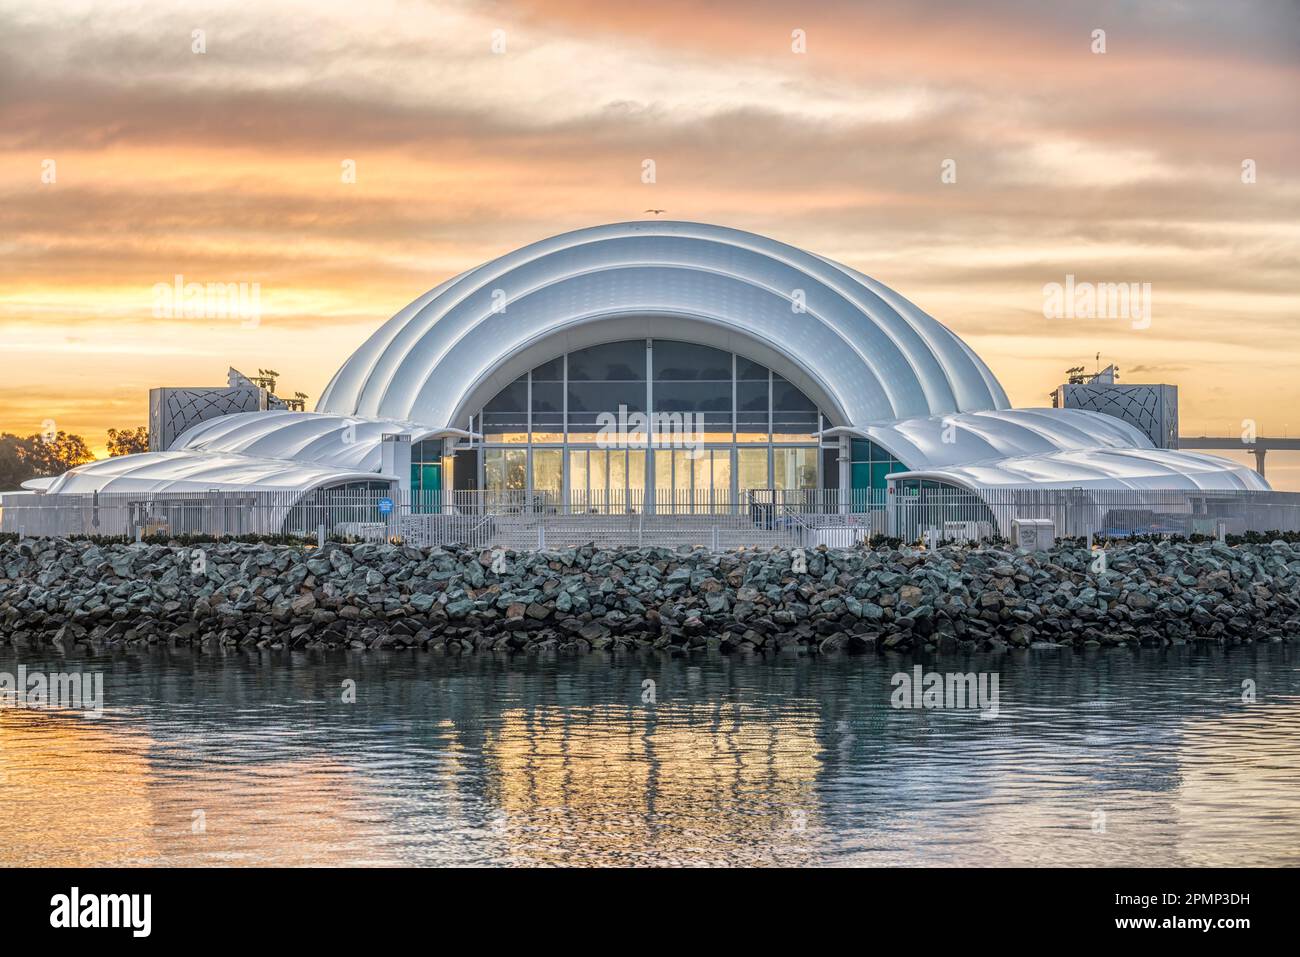 The Rady Shell at Jacobs Park in San Diego, California, USA. This image is of the backside of the structure. Stock Photo